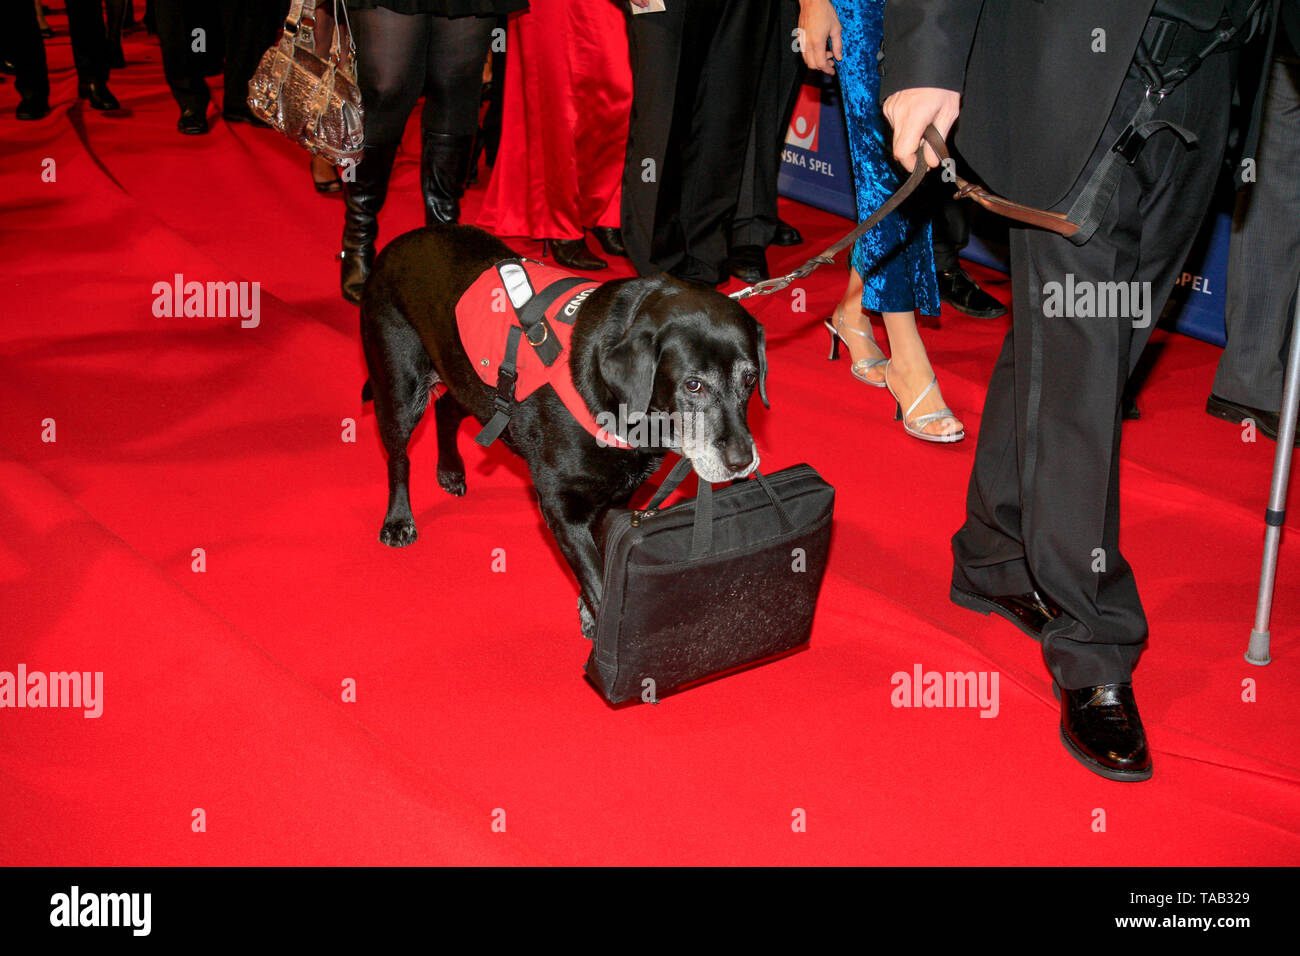 ASSISTANCE DOG on red carpet carrying a bag 2010 Stock Photo